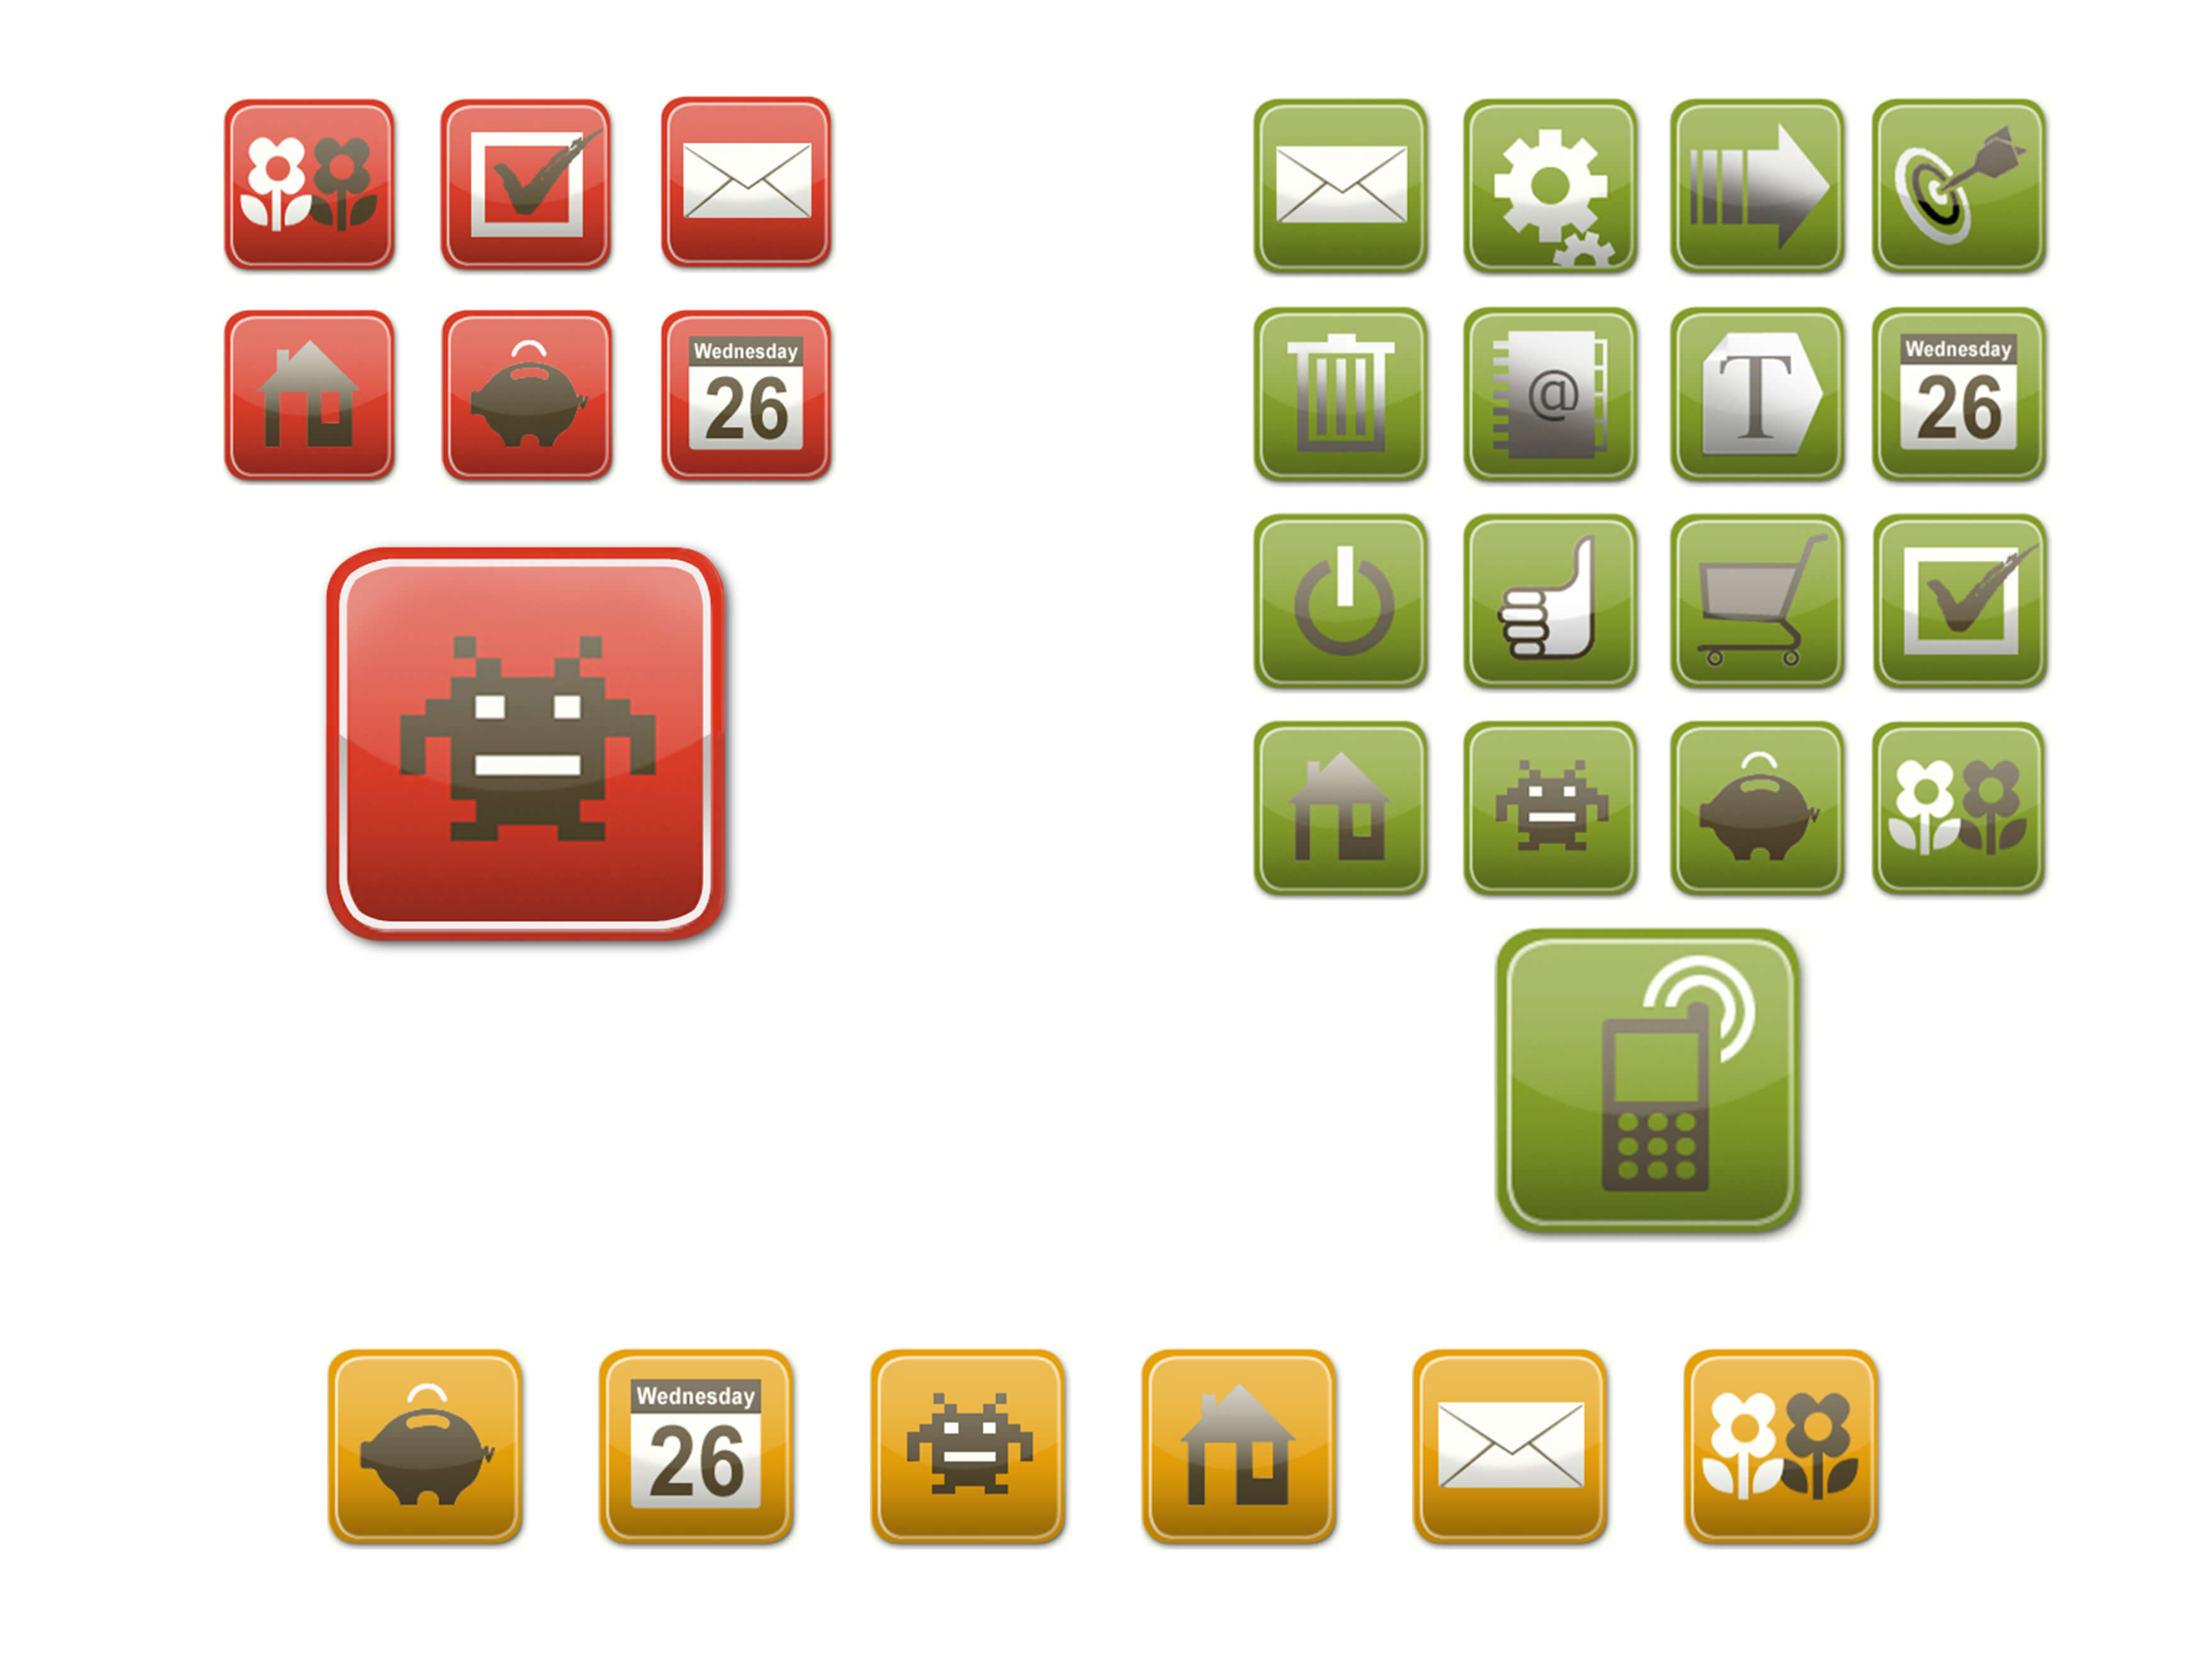 Website custon icons and buttons